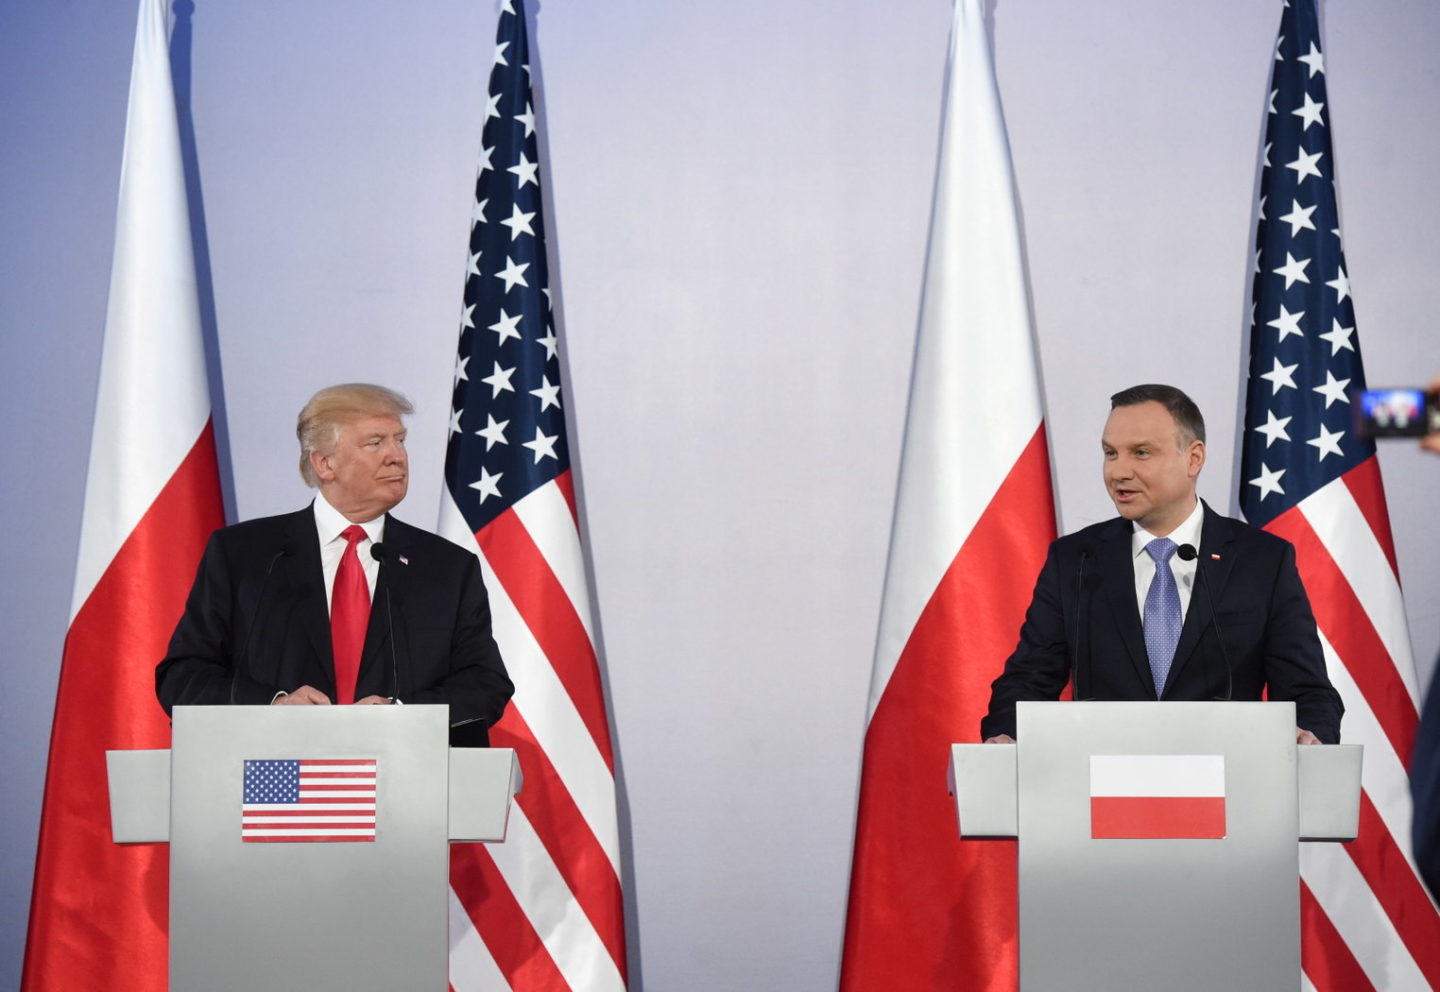 Political meeting of two leader - Donald Trump and Andrzej Duda.